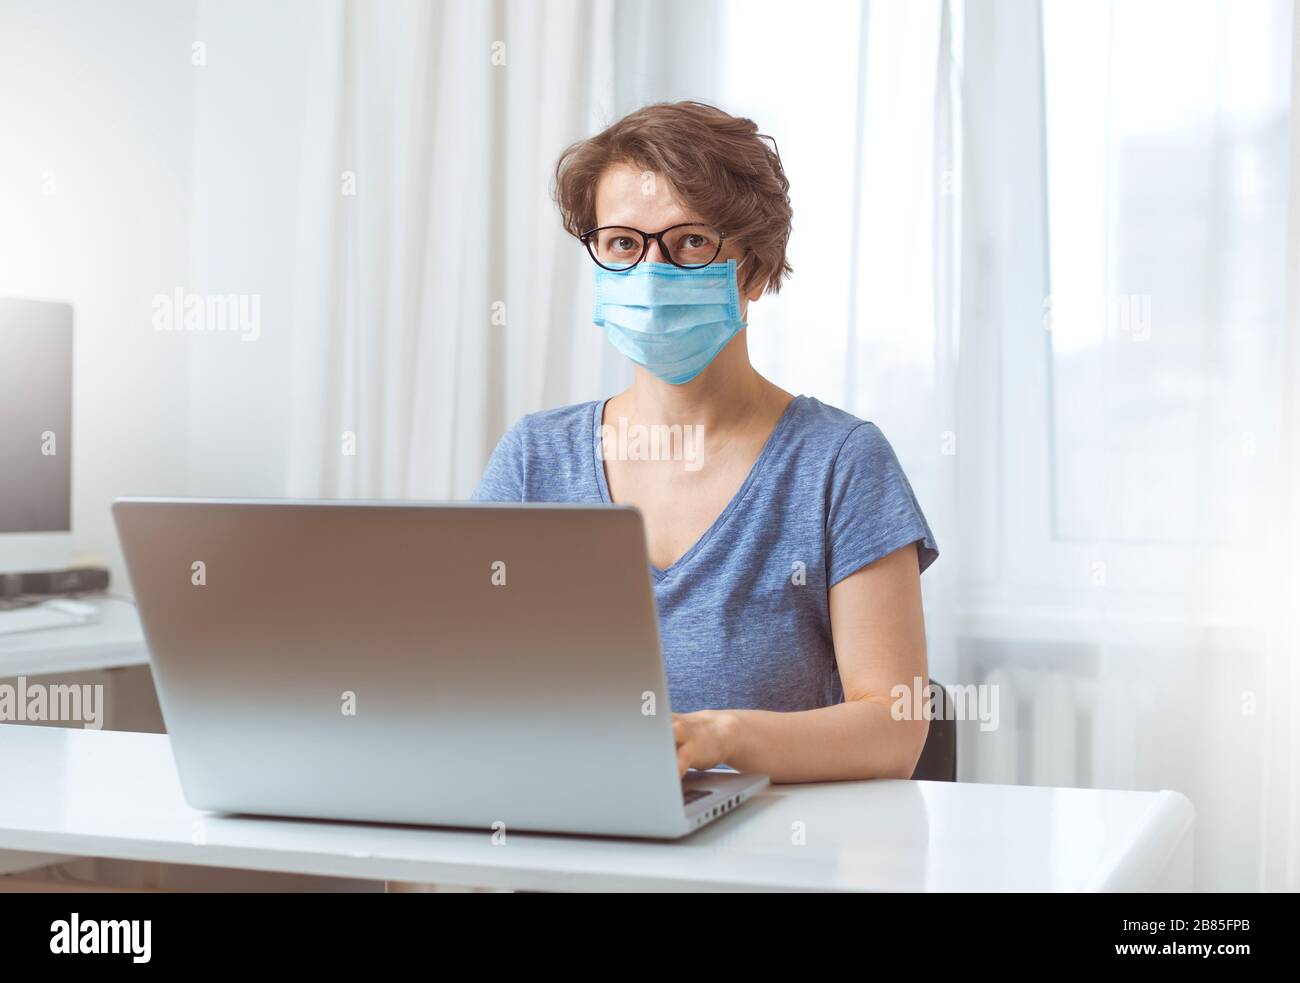 A female freelancer in a medical mask works remotely at home on a computer. The concept of quarantine during viral diseases. Stock Photo